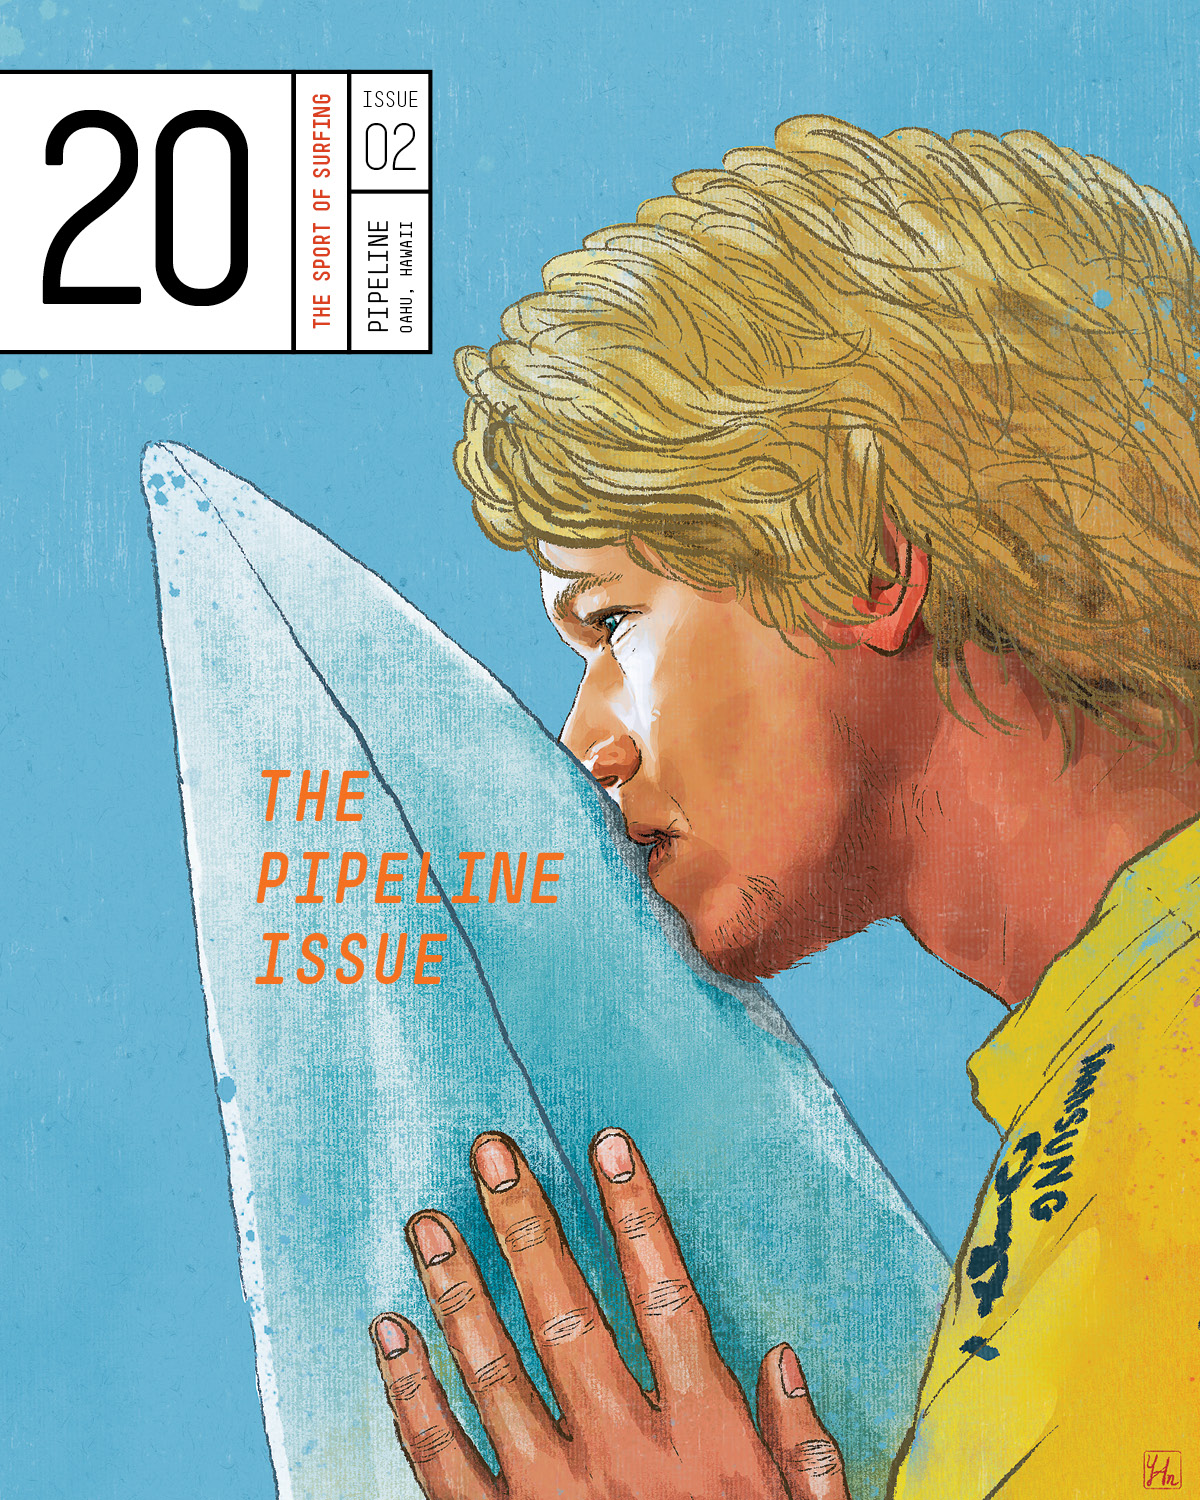 Issue 2 cover